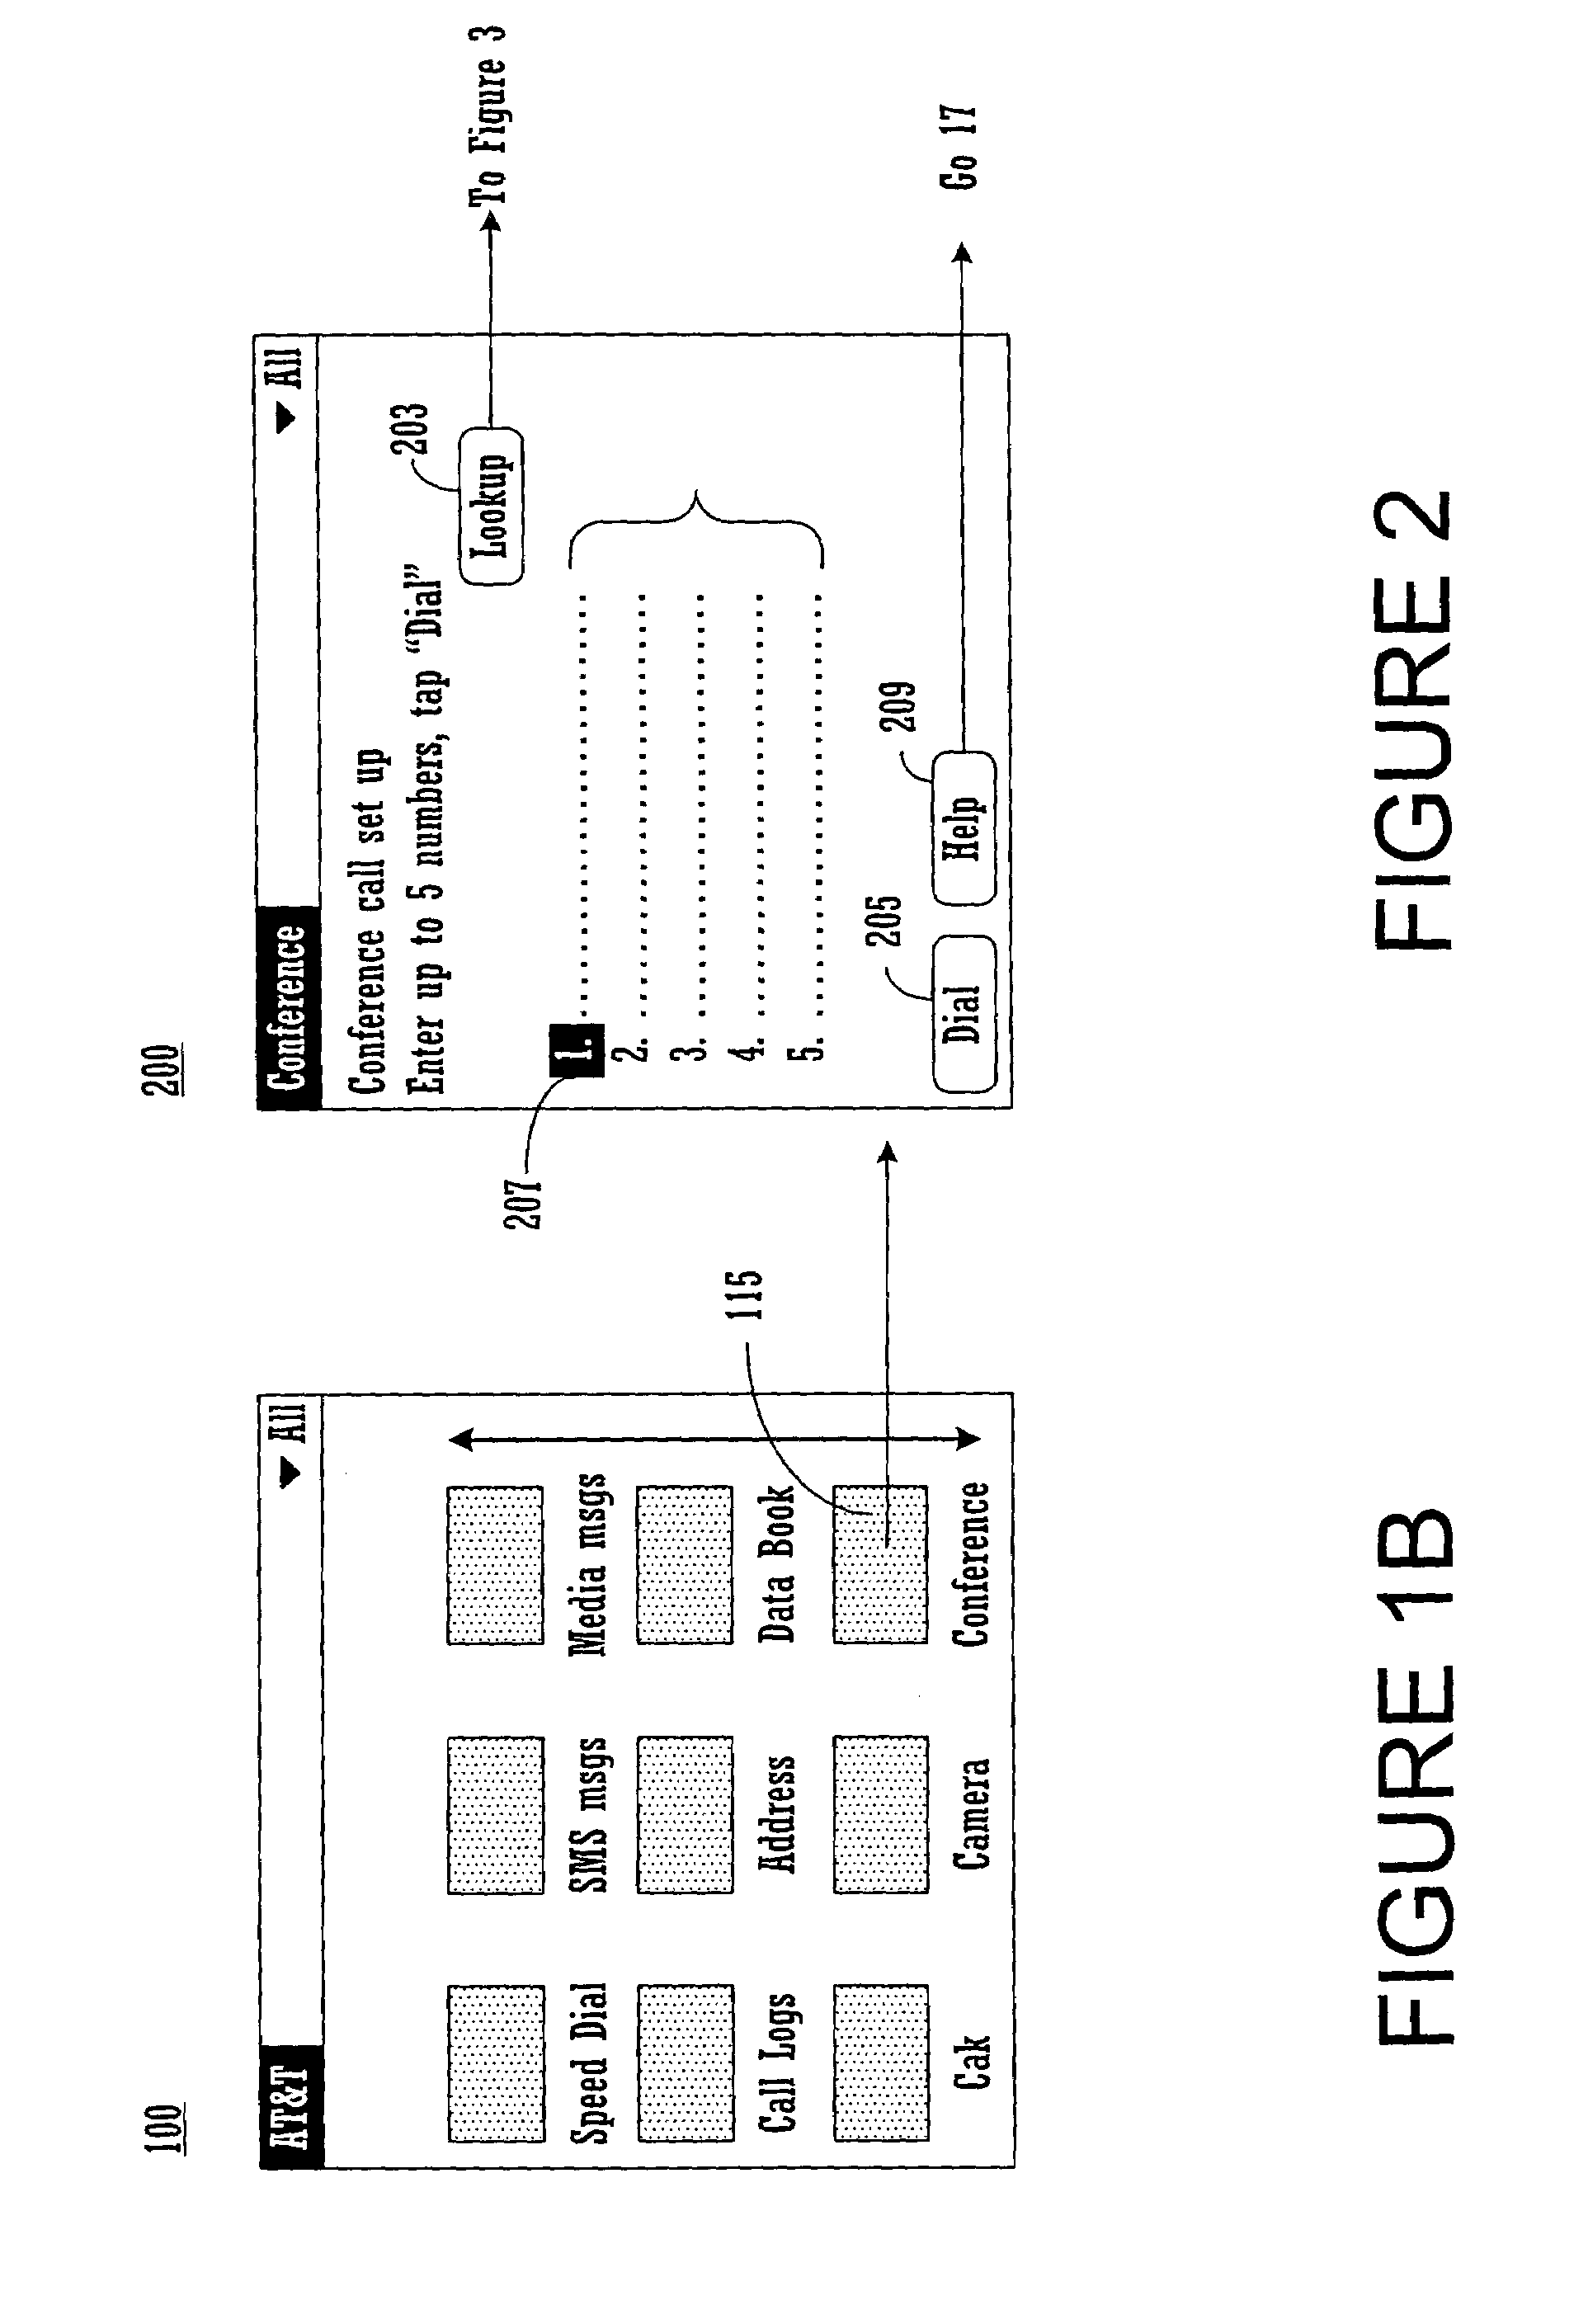 Automated telephone conferencing method and system